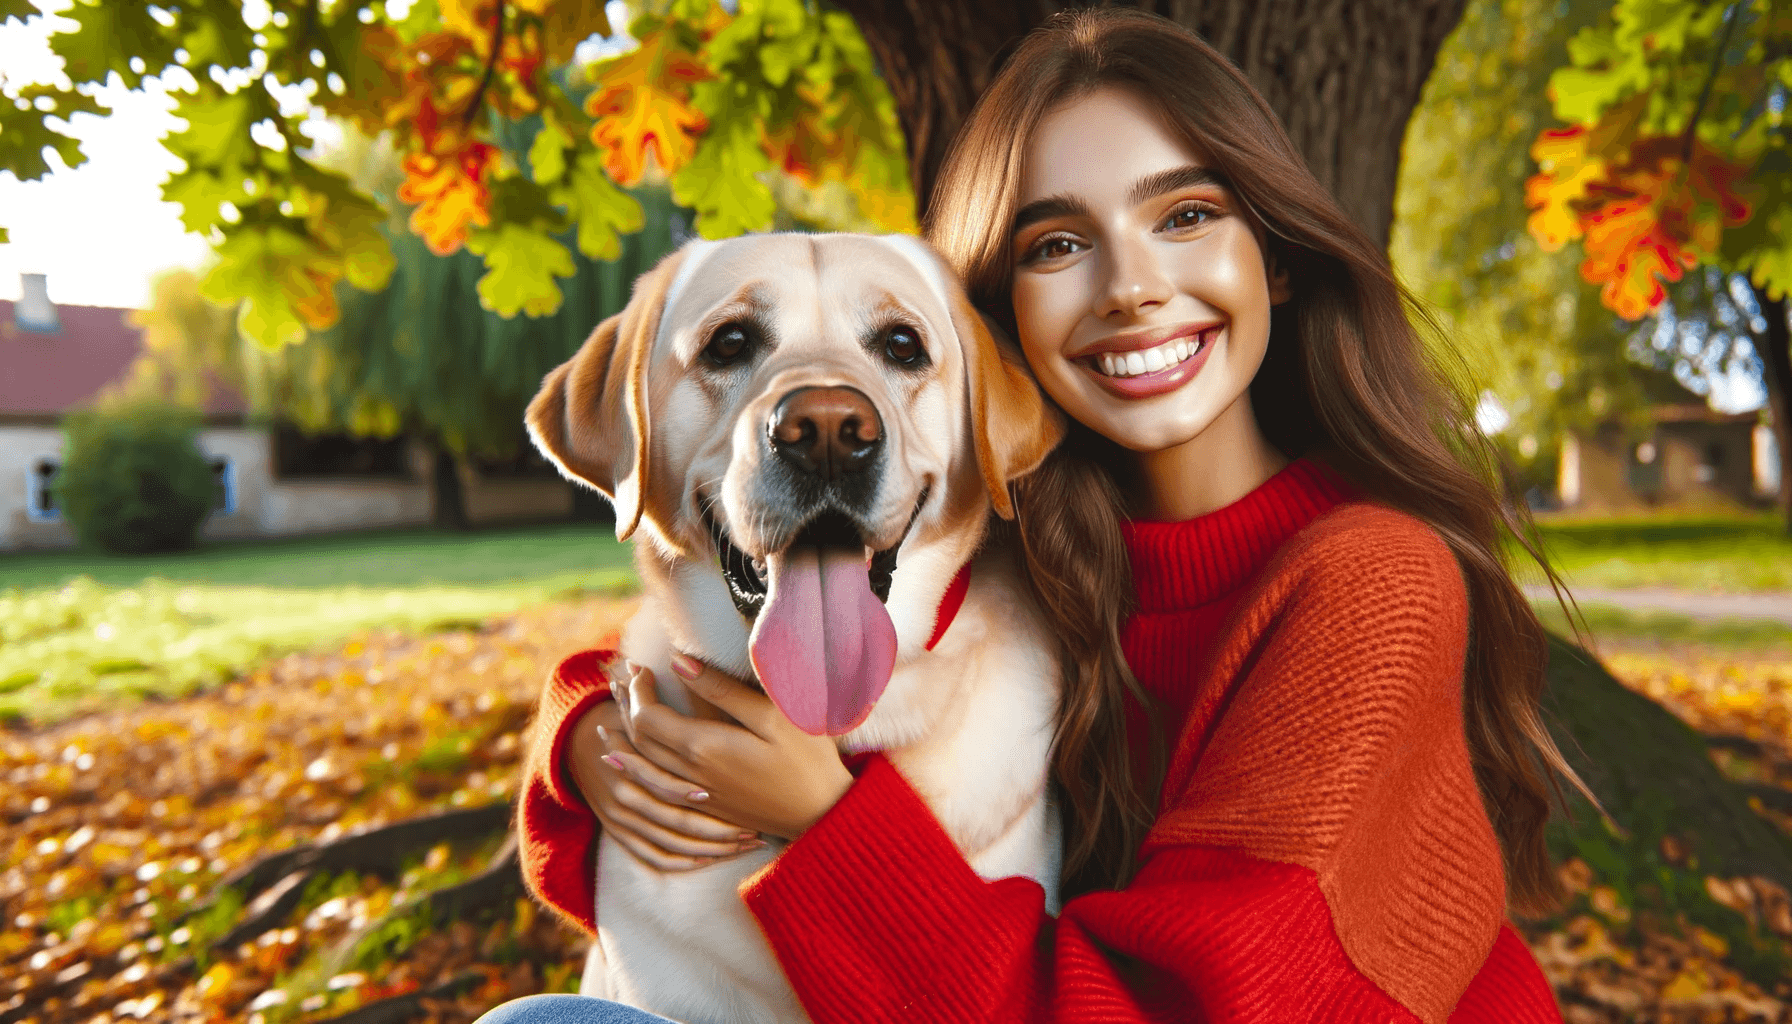 Labrador Retriever (Labradorii) with its tongue out being embraced by a cheerful young woman in a park.